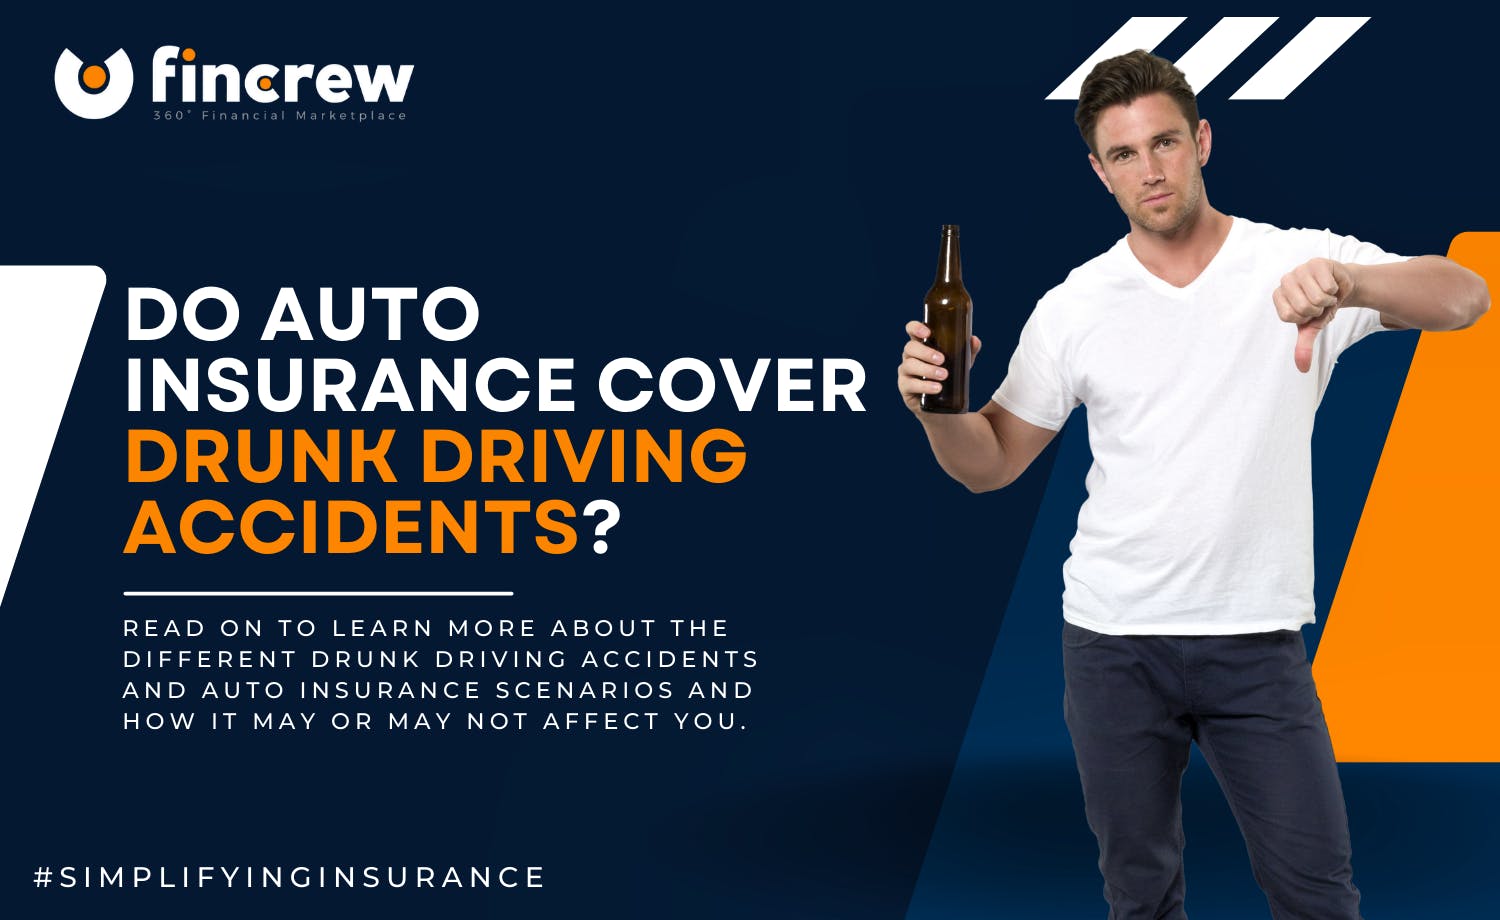 Do Auto Insurance Cover Drunk Driving Accidents?